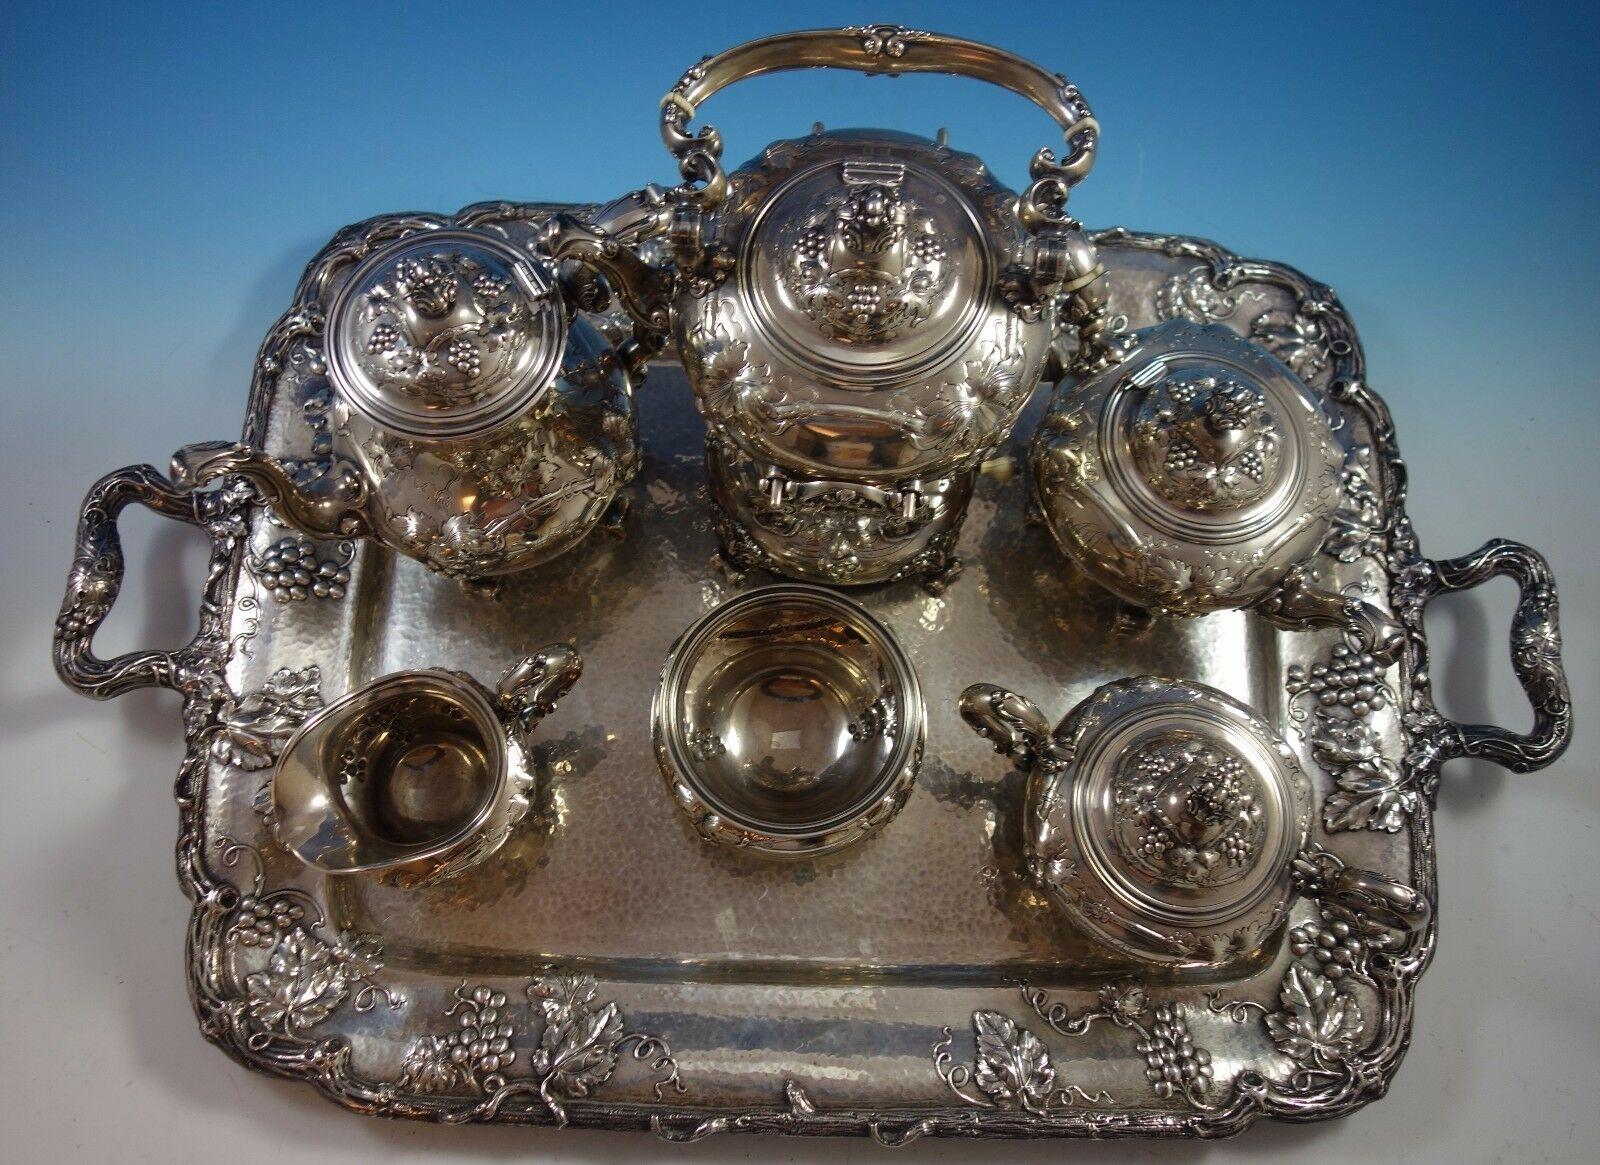 Modernic by Gorham


Superb Modernic by Gorham circa 1905 sterling silver 6-piece tea set with tray, featuring a fabulous design of grapes and grape vines with leaves. All the pieces except for the tray are marked with #1818B, and the tray is